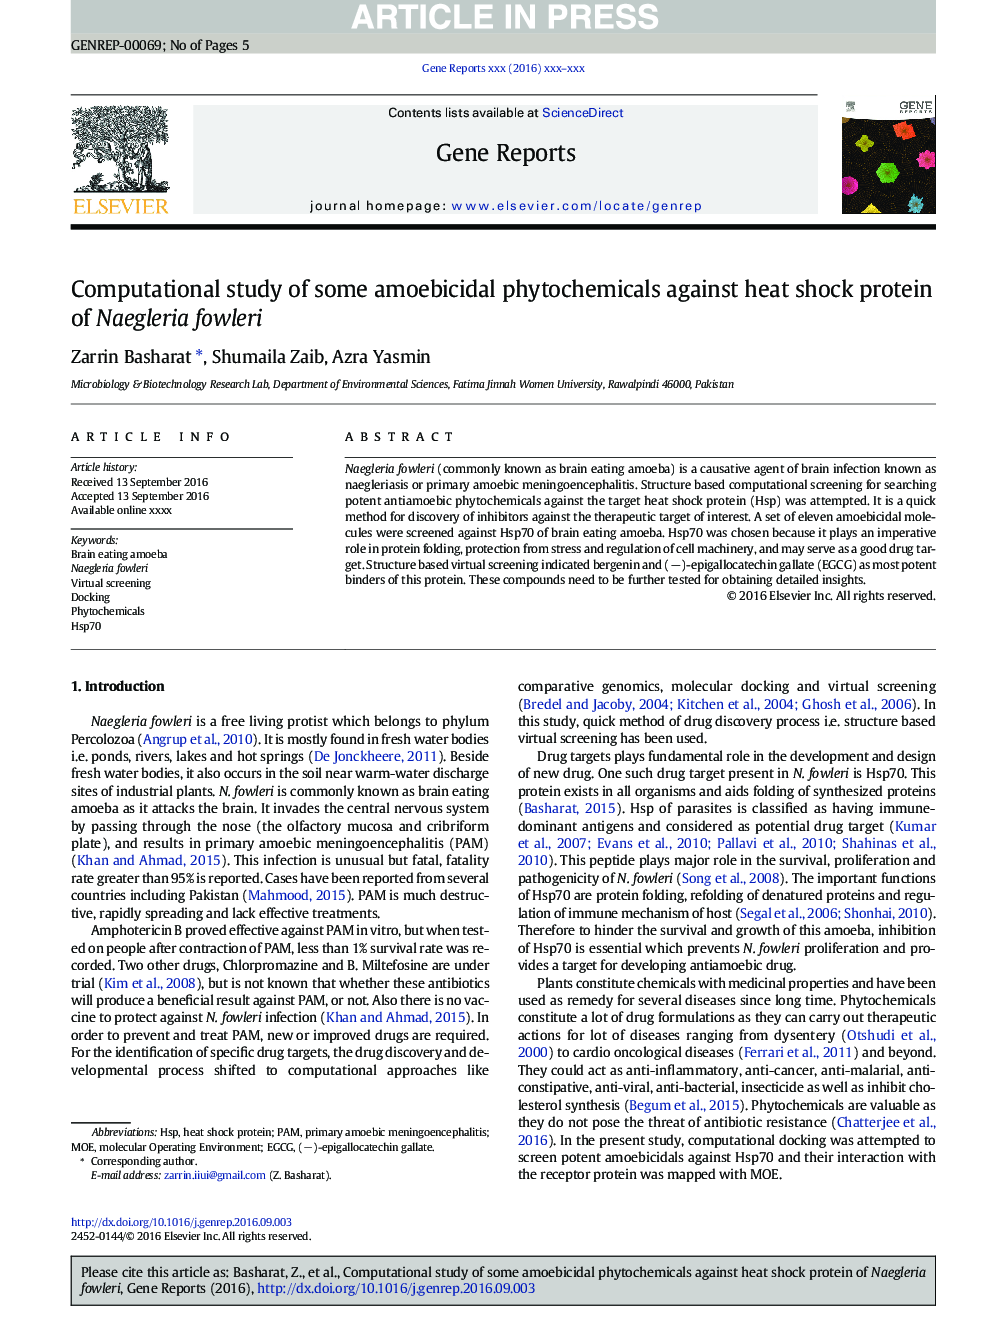 Computational study of some amoebicidal phytochemicals against heat shock protein of Naegleria fowleri